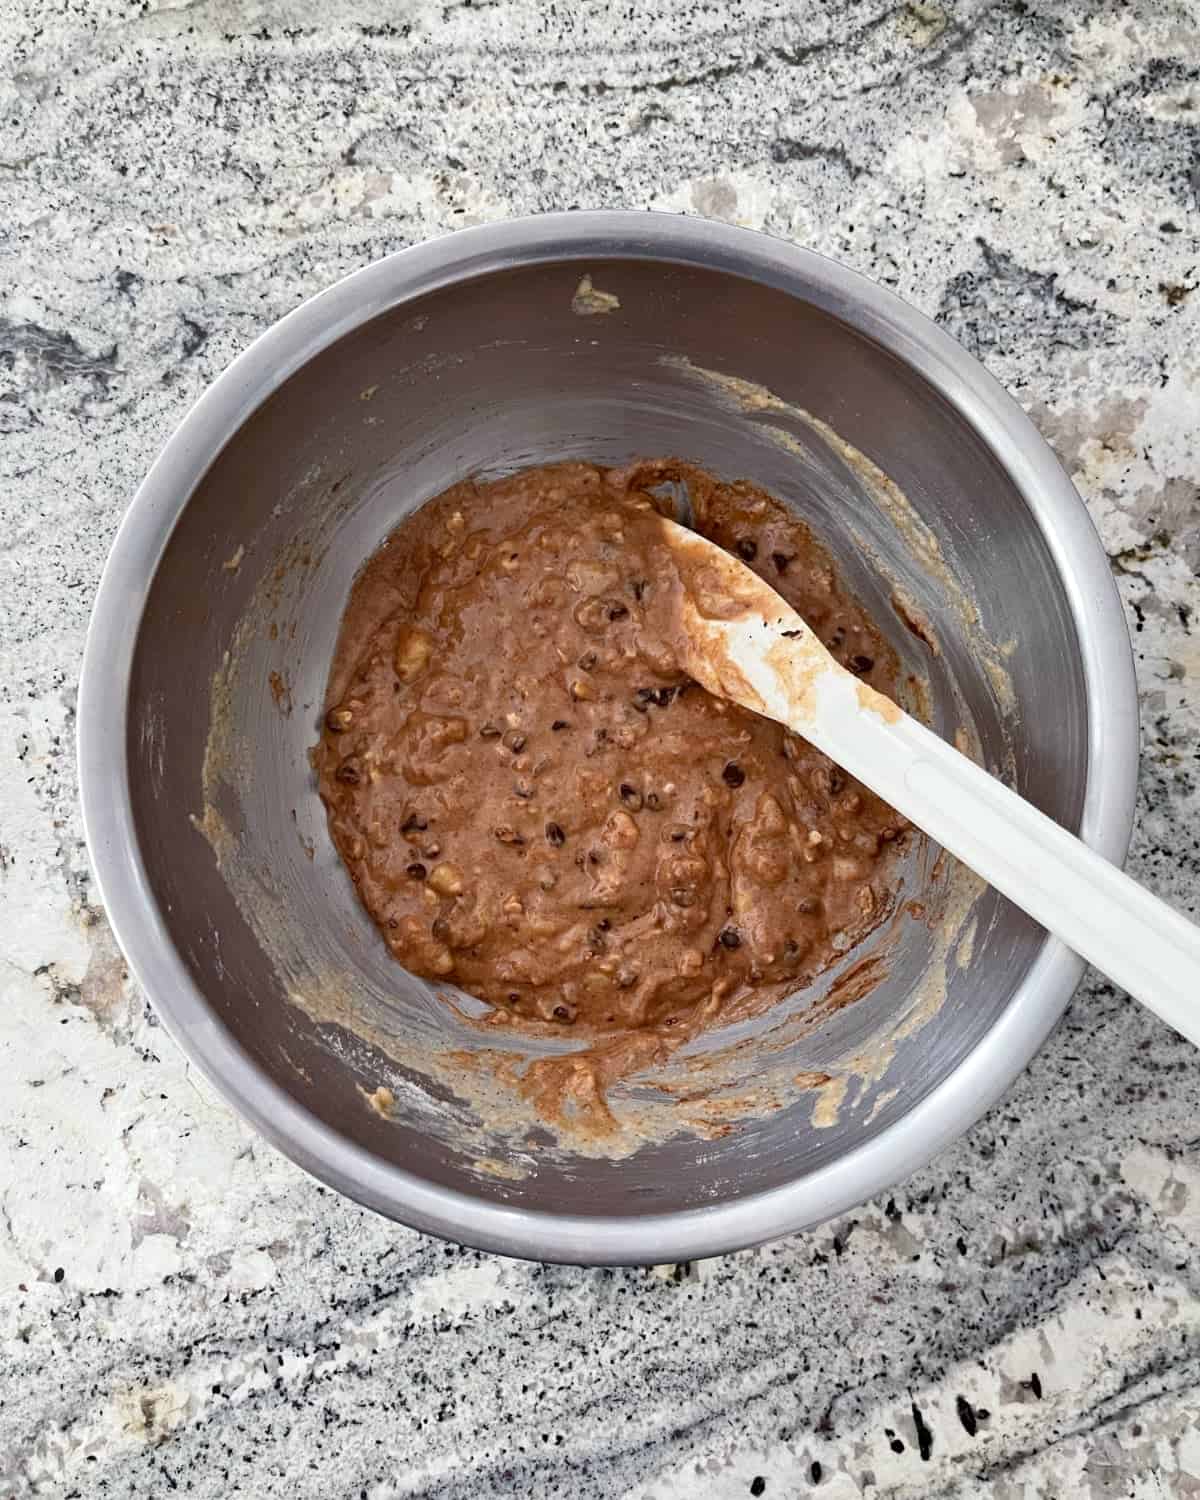 Folding cocoa powder and mini chocolate chips into banana bread batter with spatula in mixing bowl.